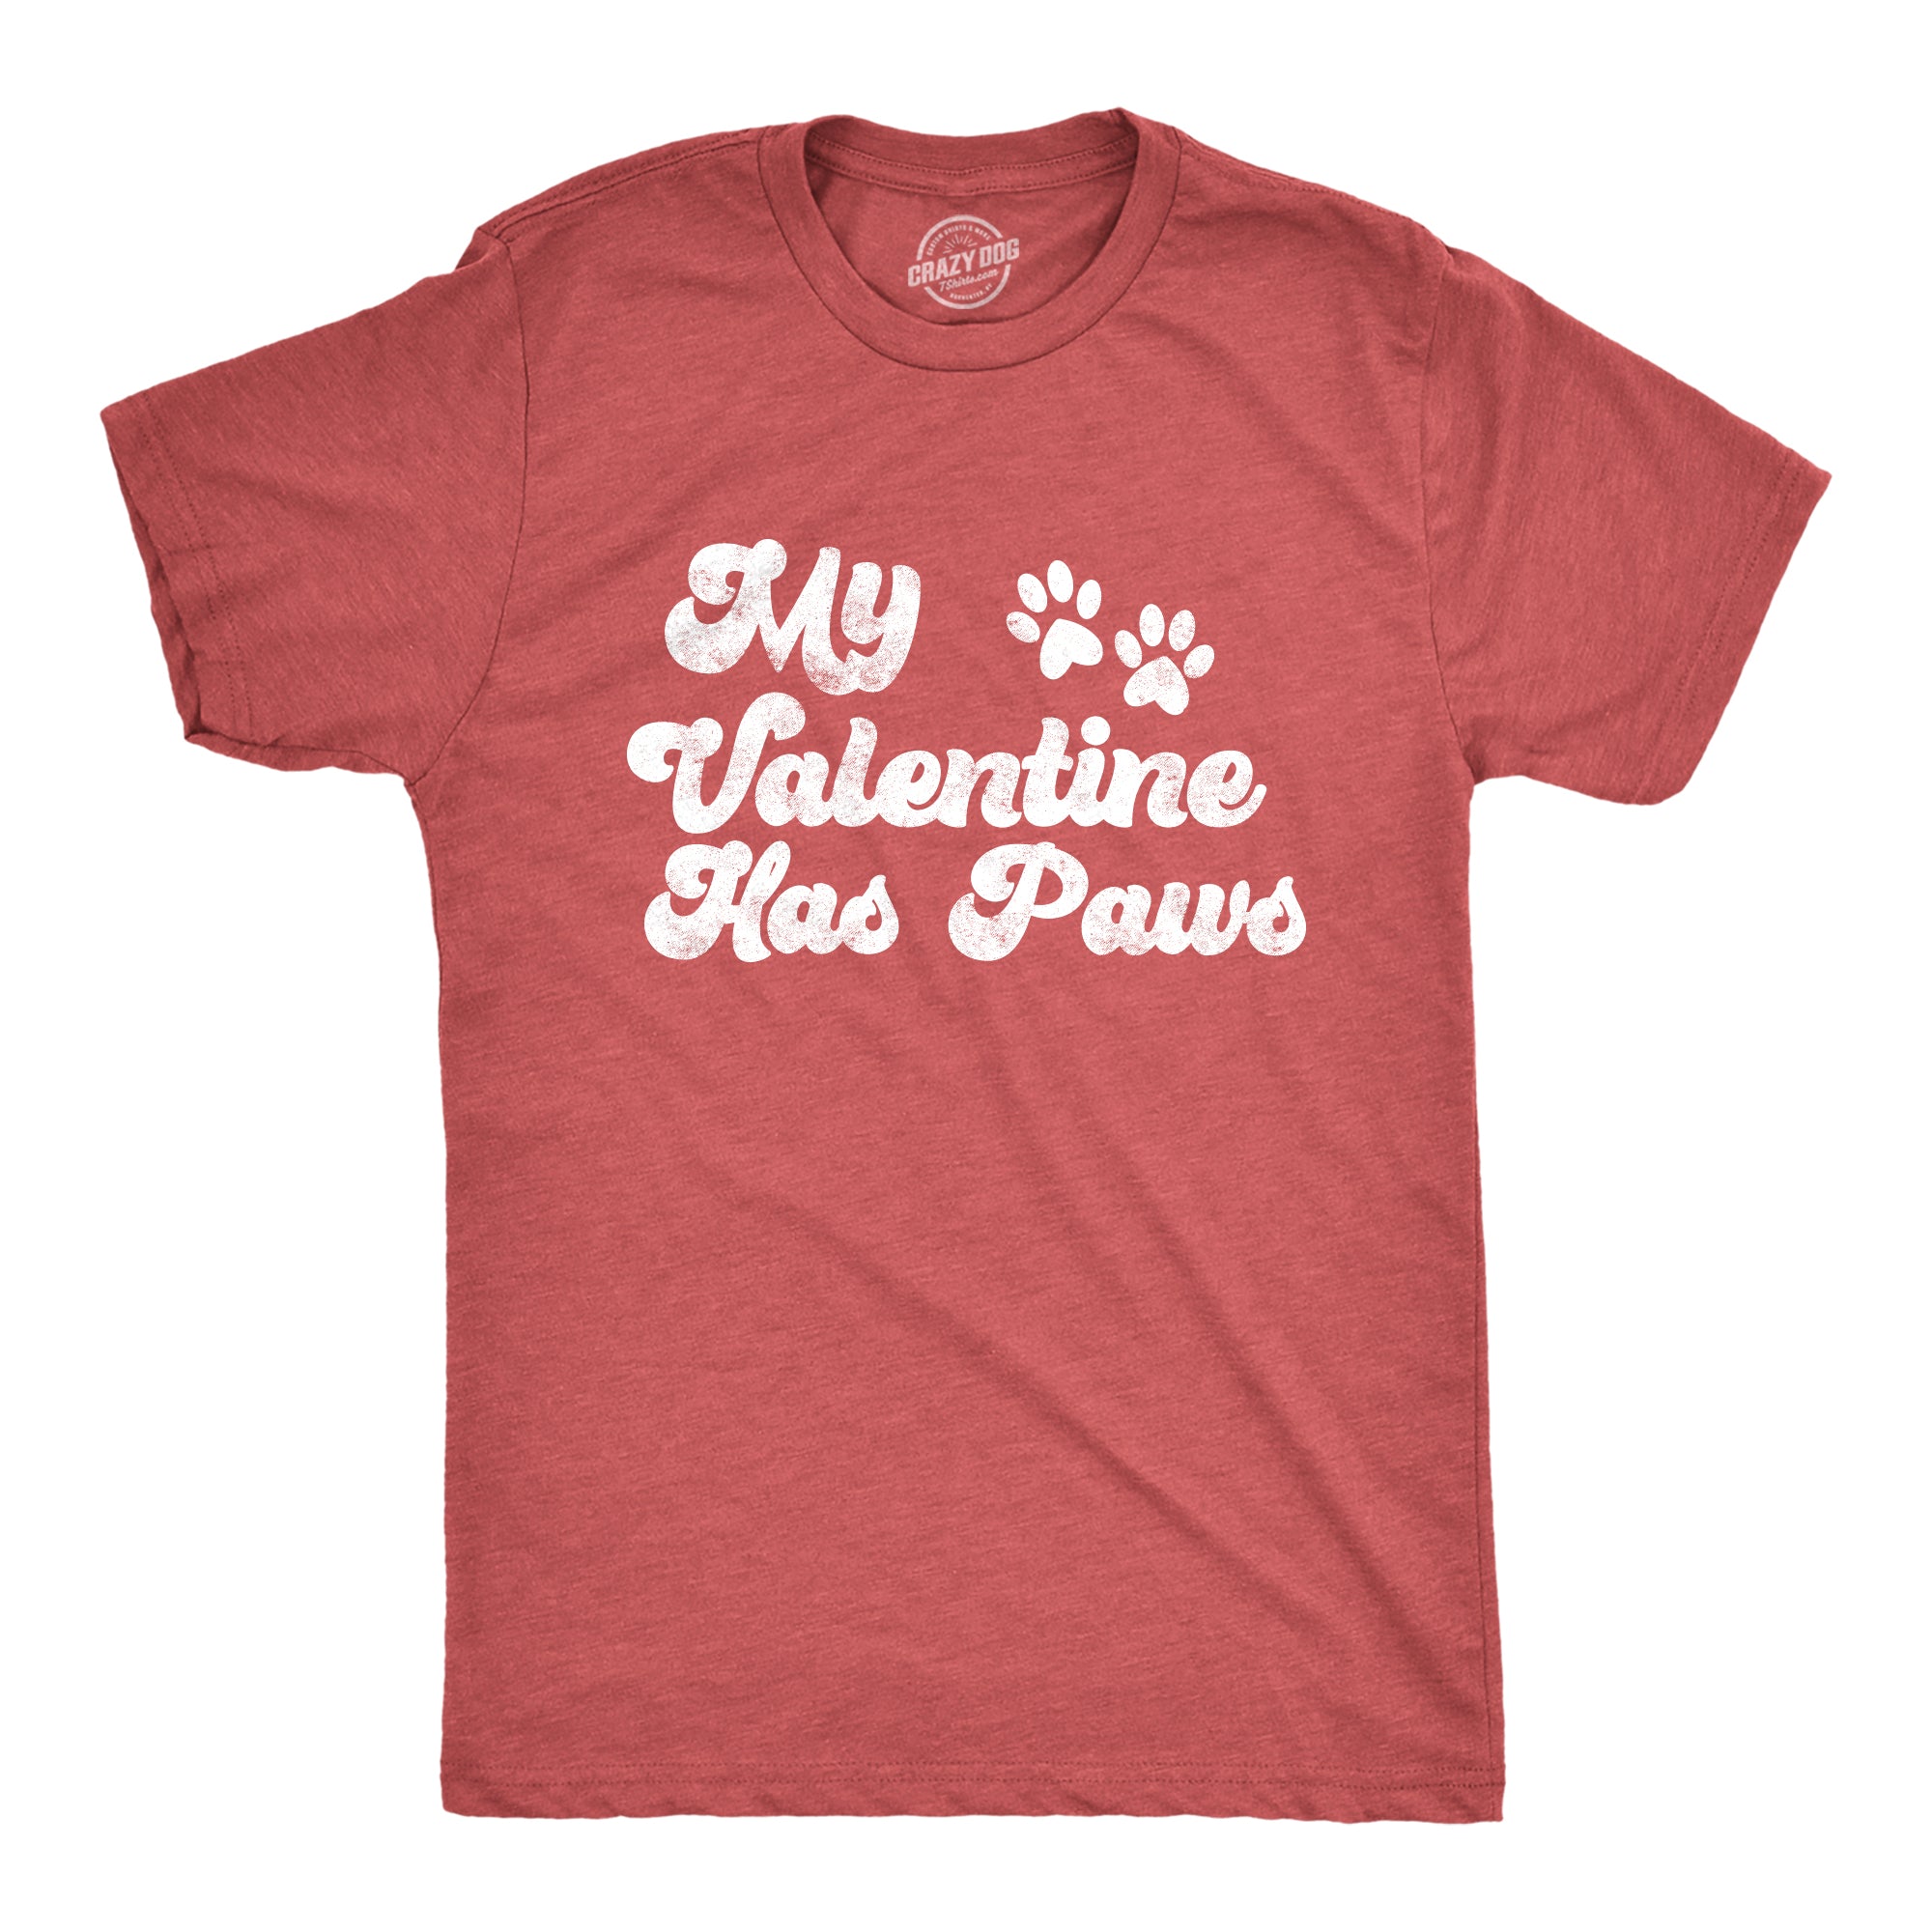 Funny Heather Red - PAWS My Favorite Valentine Has Paws Mens T Shirt Nerdy Valentine's Day Tee